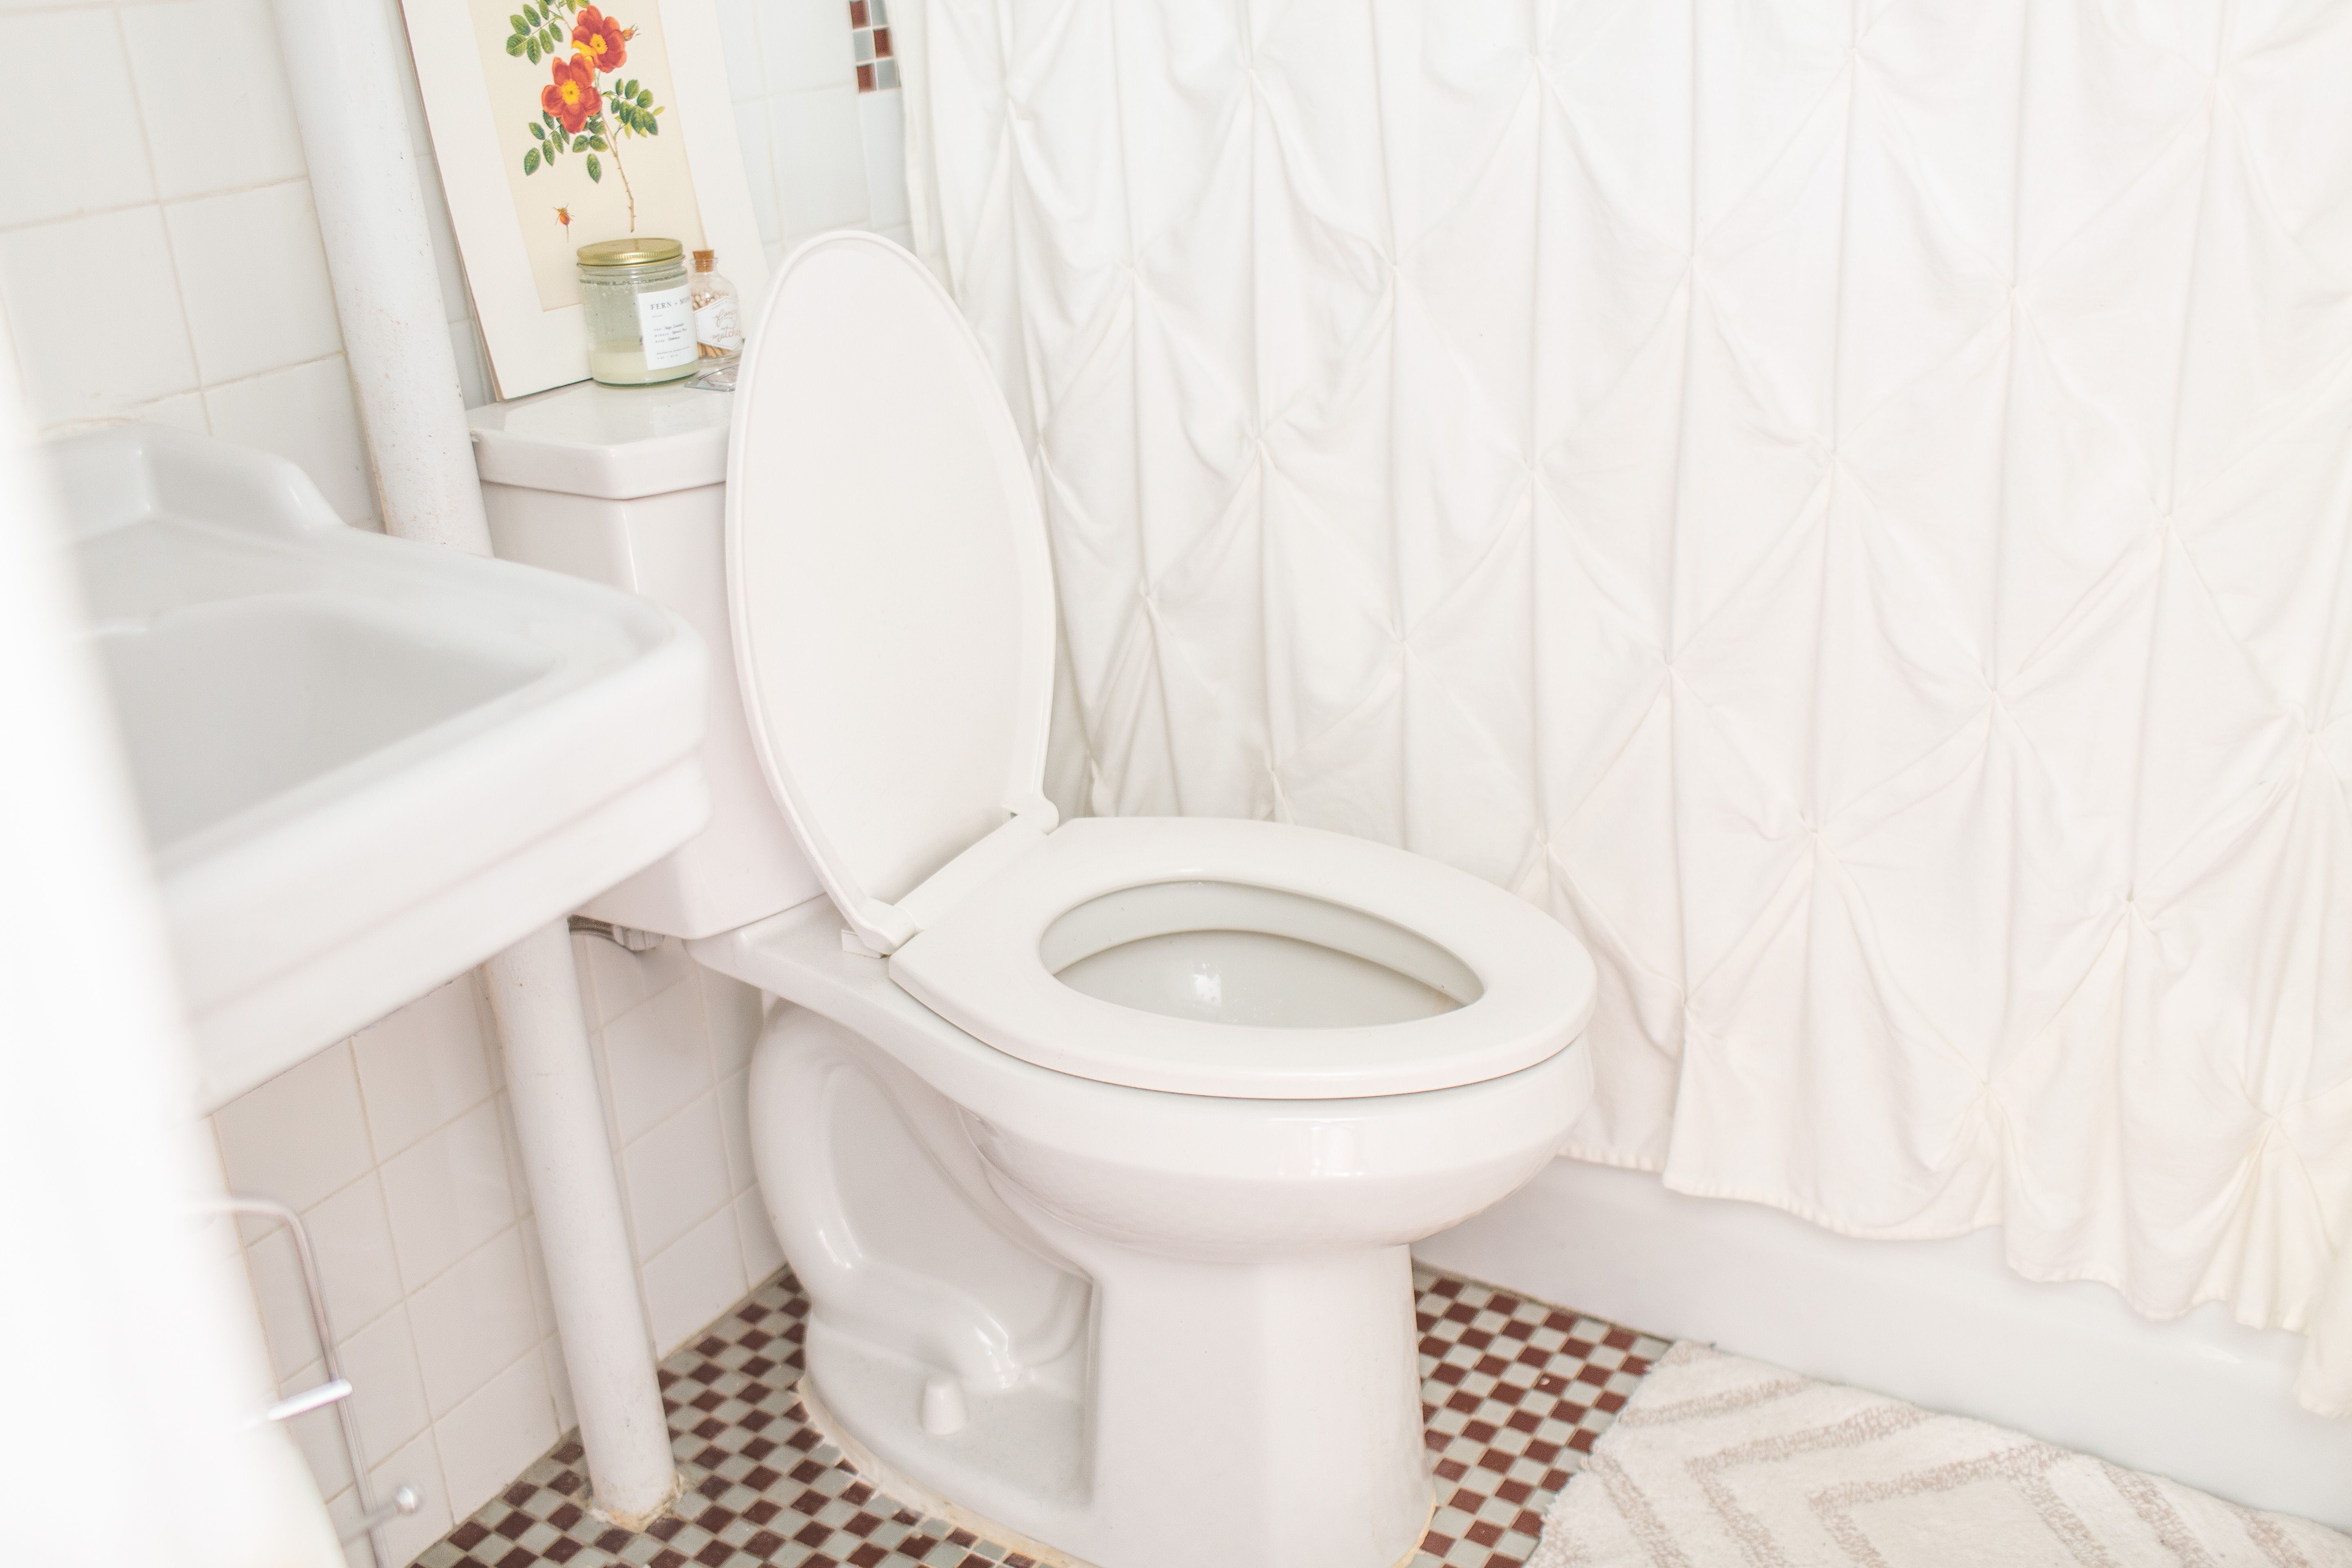 8 Everyday Items That Are Dirtier Than a Toilet